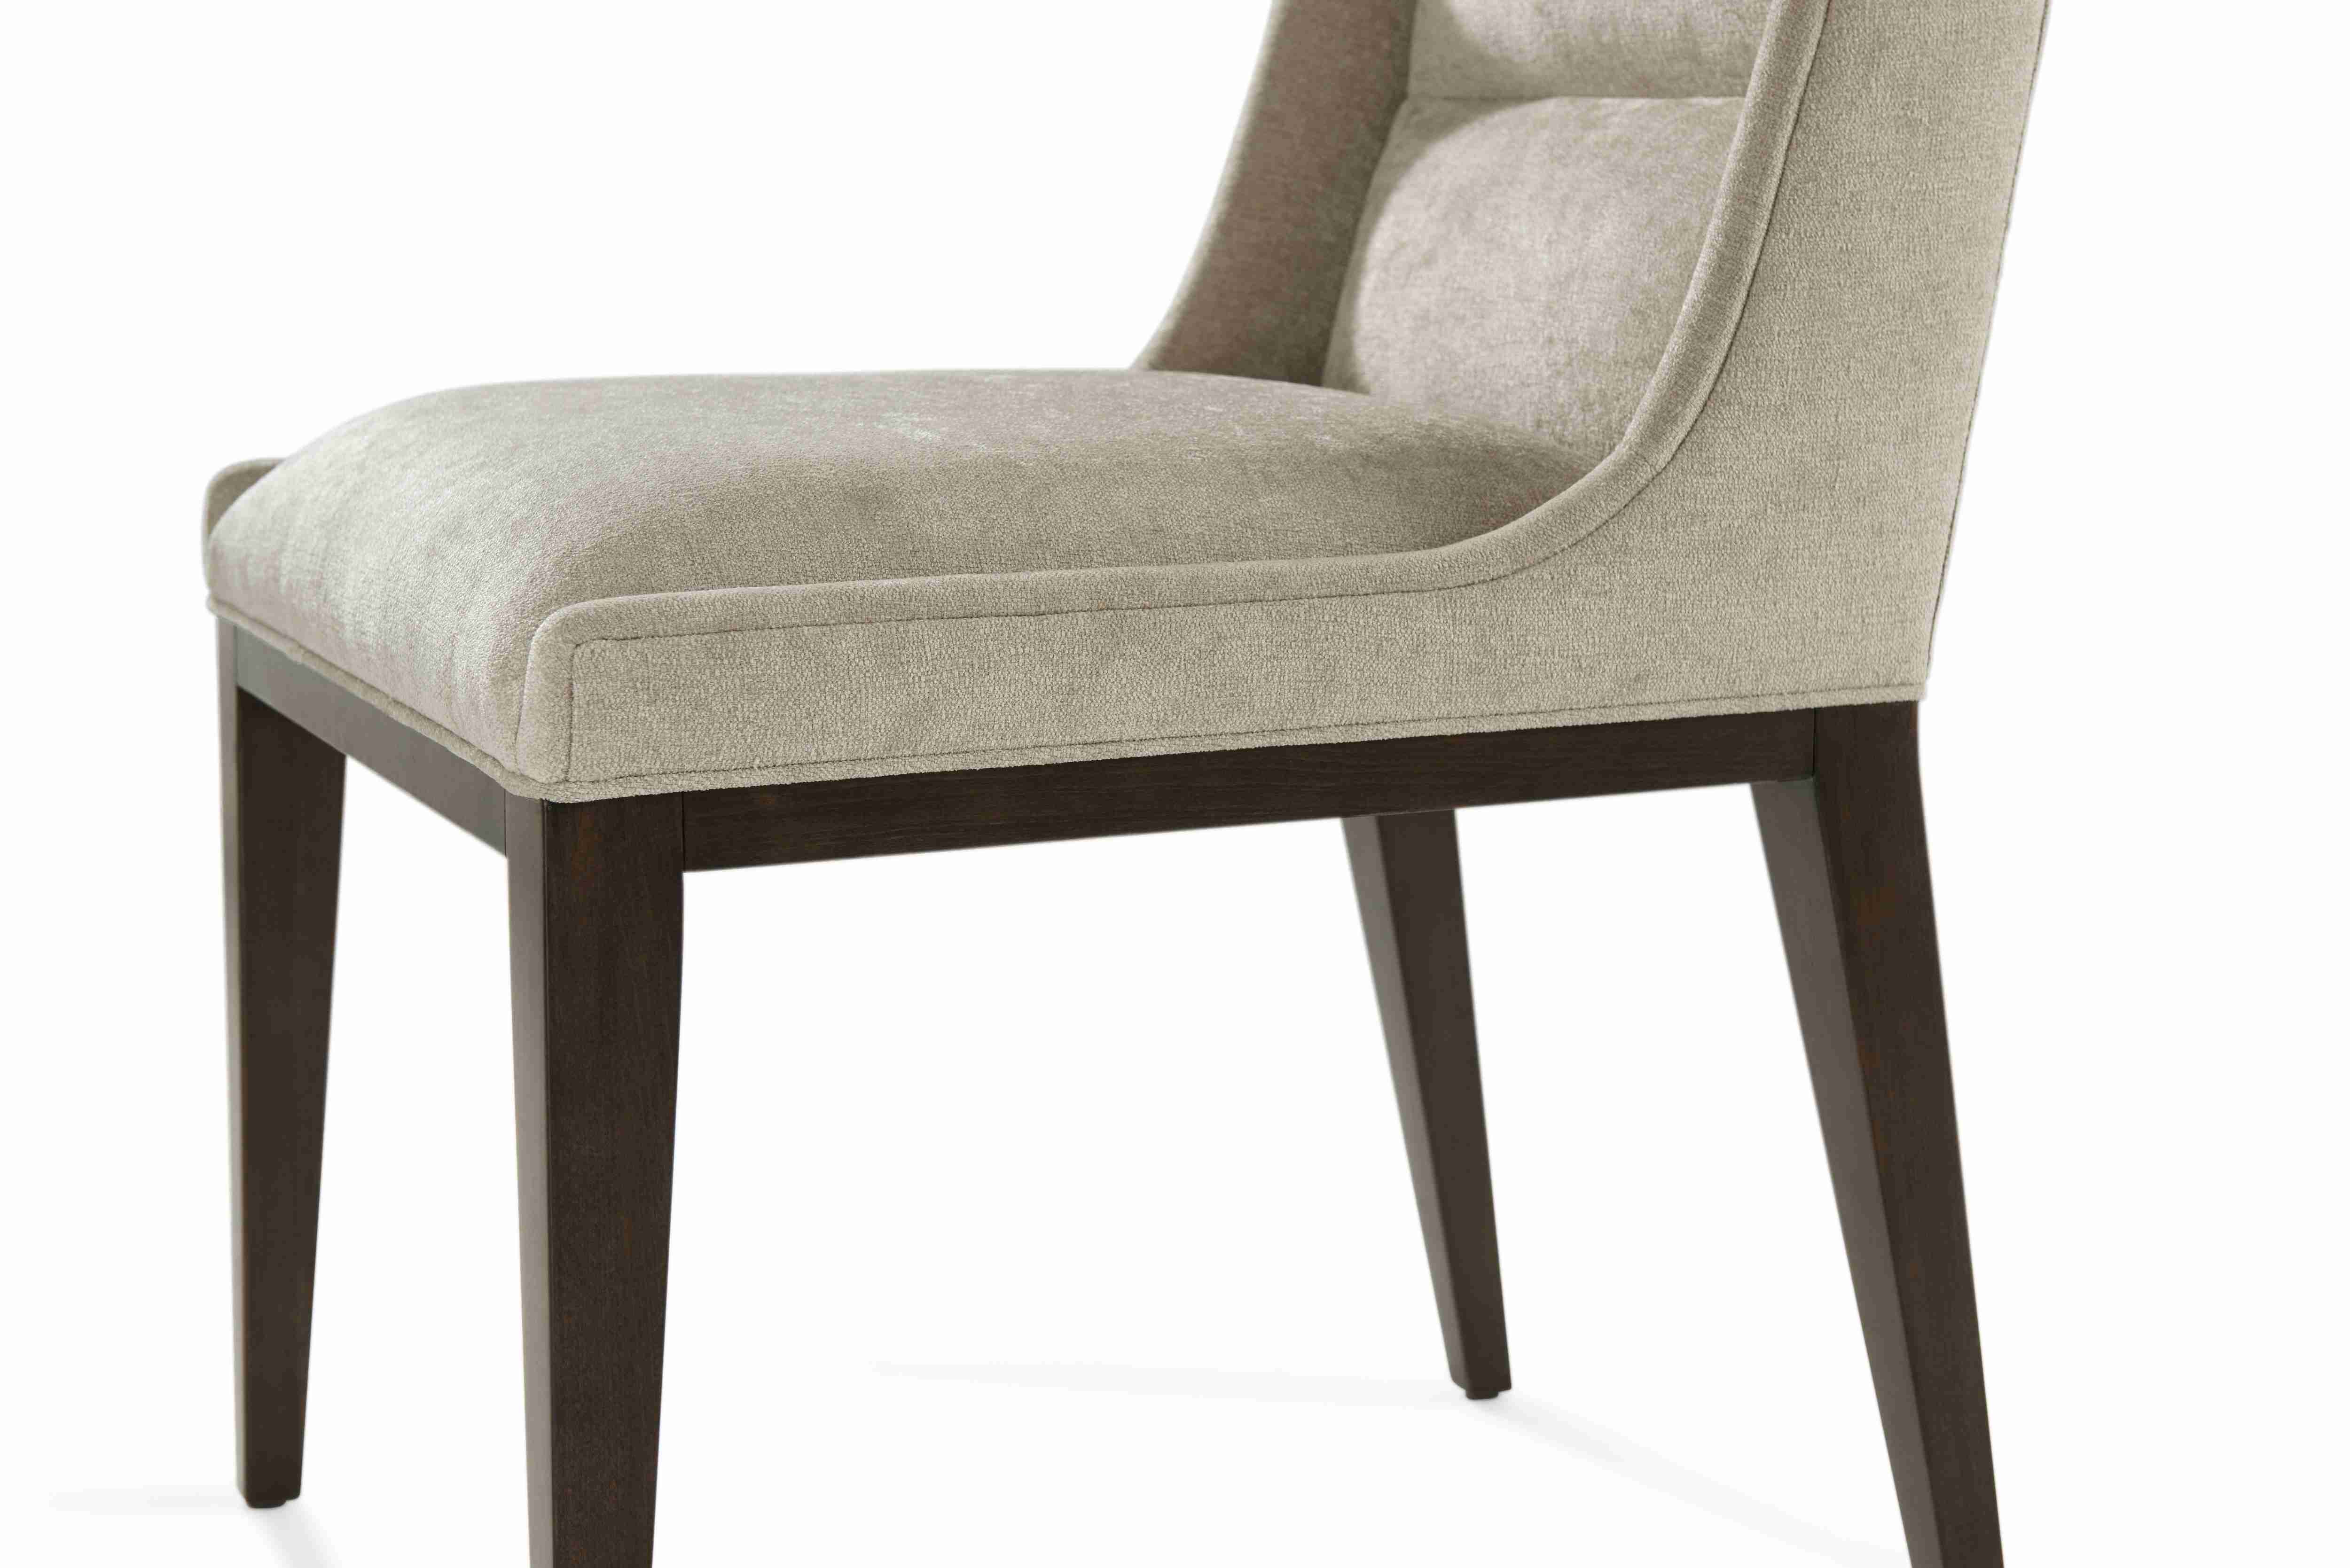 LIDO UPHOLSTERED DINING SIDE CHAIR